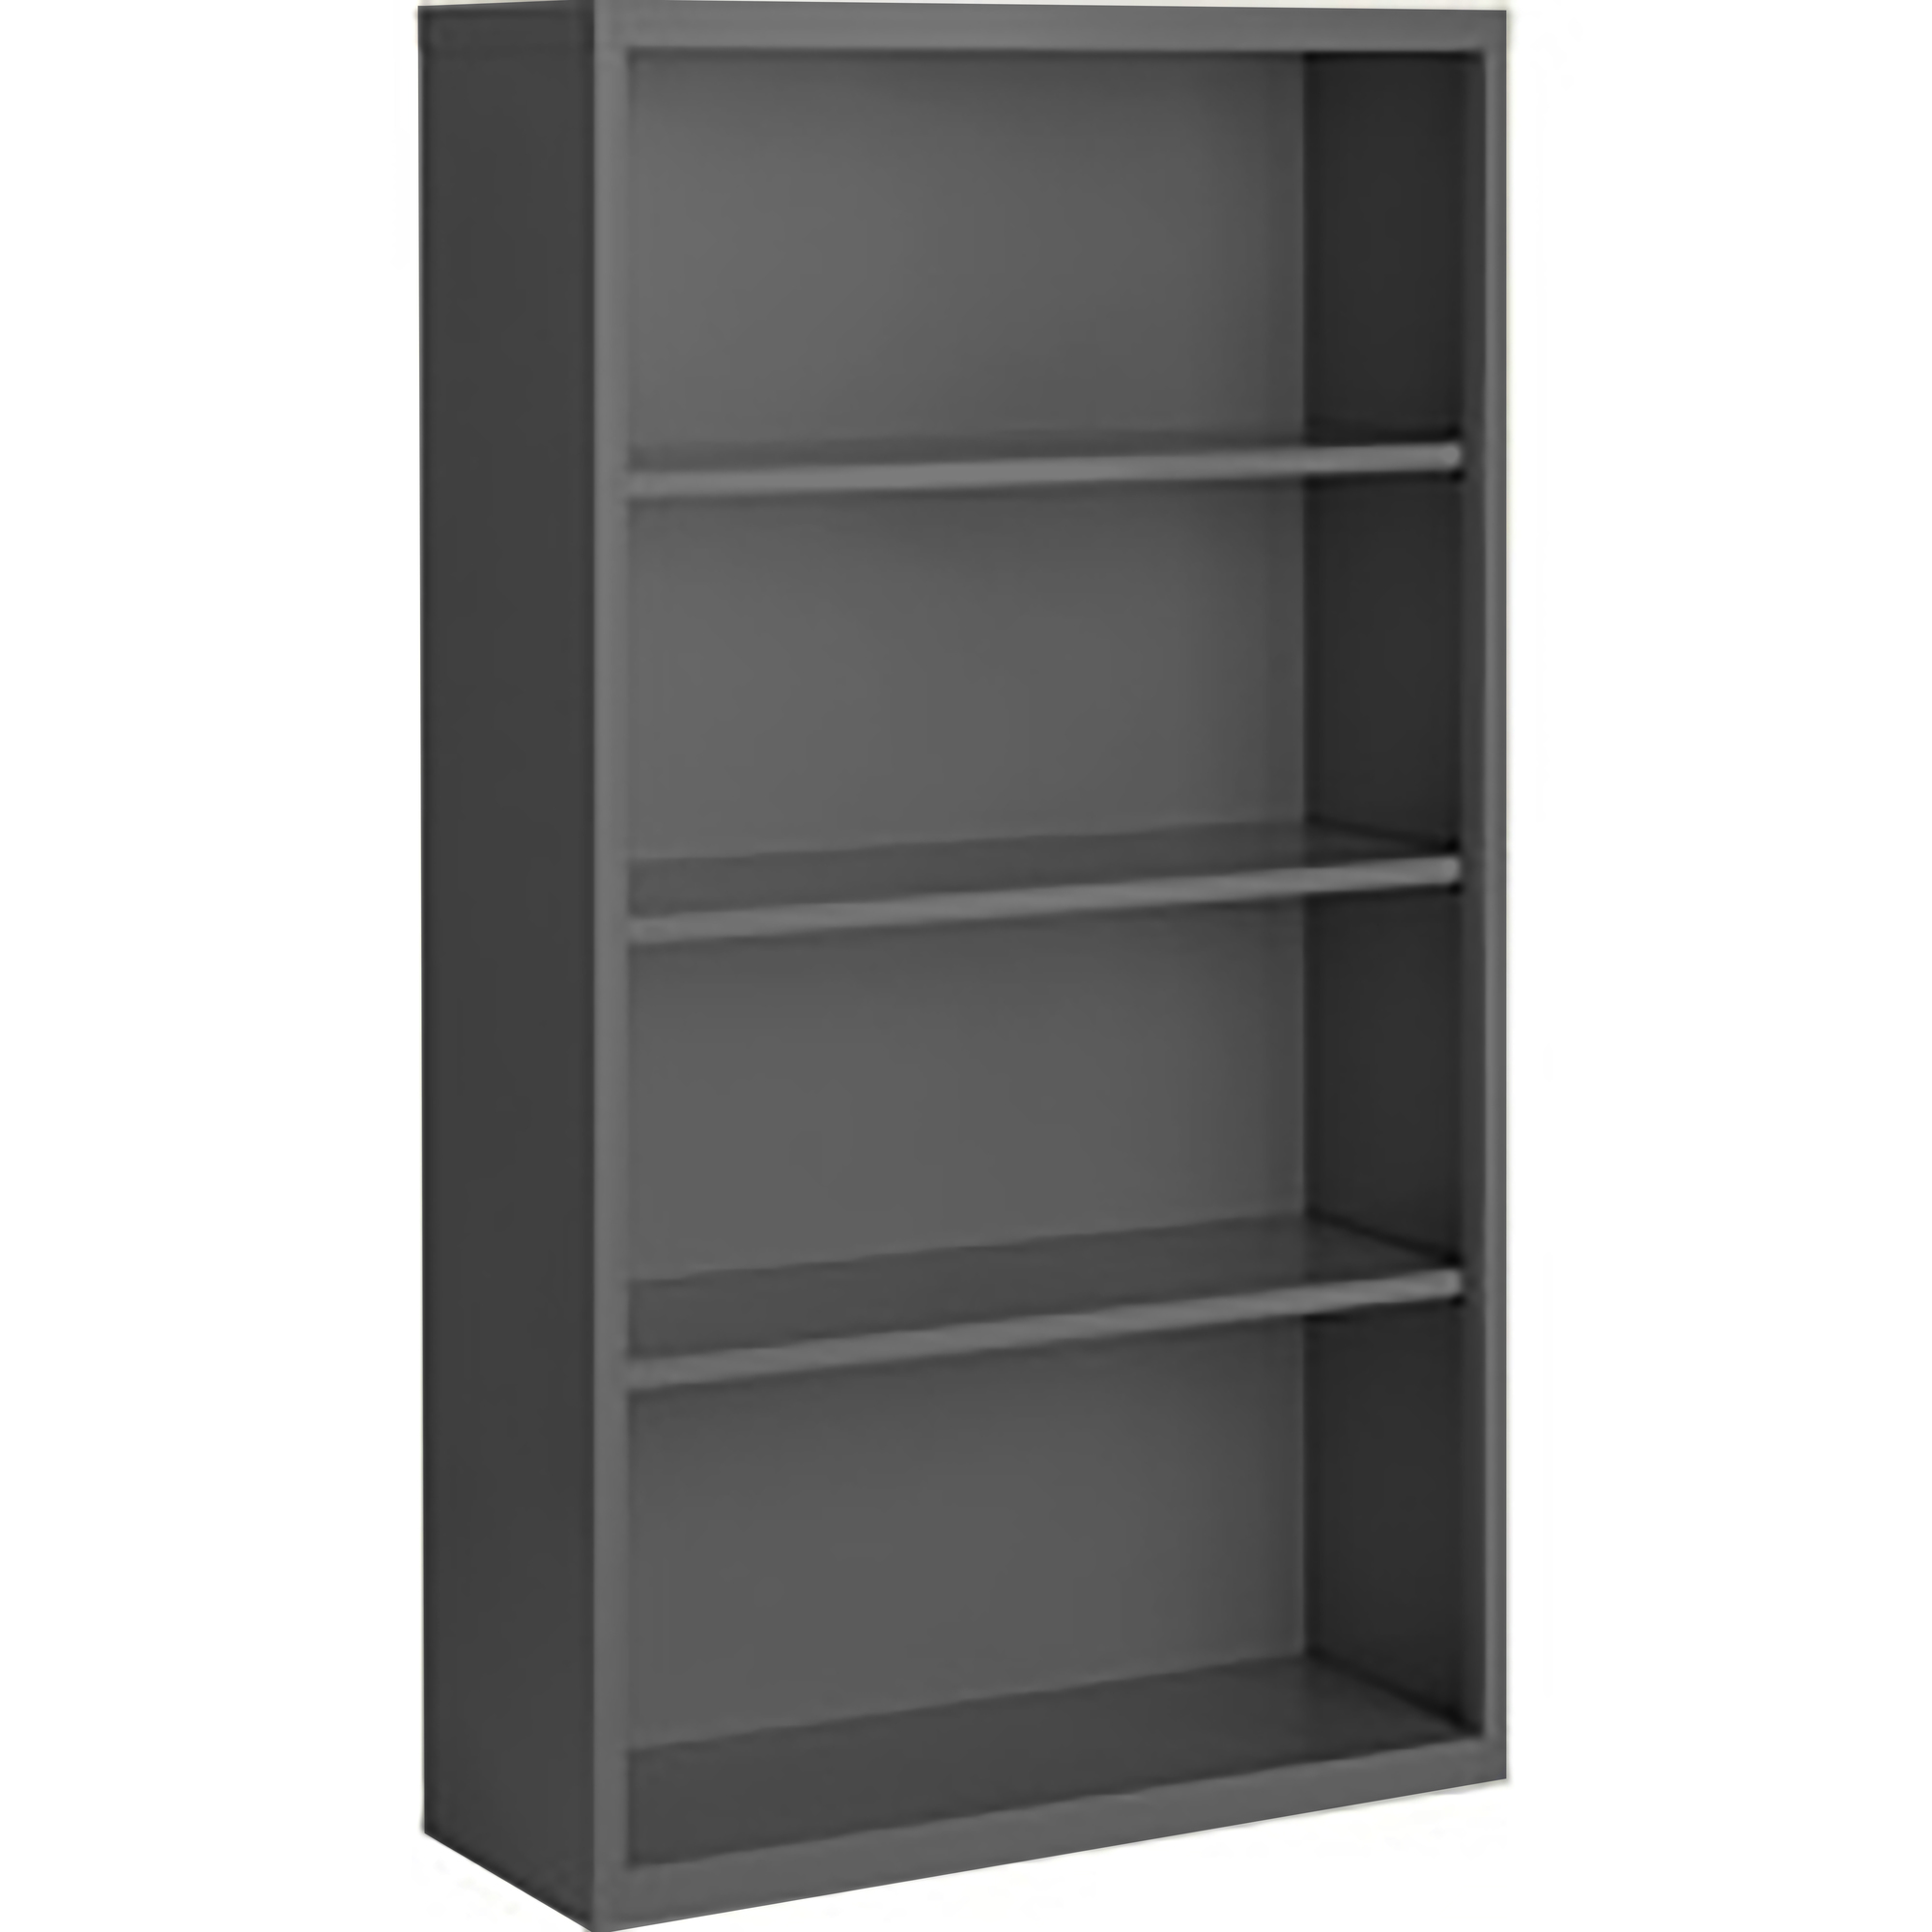 Steel Cabinets USA, 36Inchx18Inchx60Inch Charcoal Bookcase Steel Full Assembled, Height 60 in, Shelves (qty.) 4, Material Steel, Model BCA-366018-C